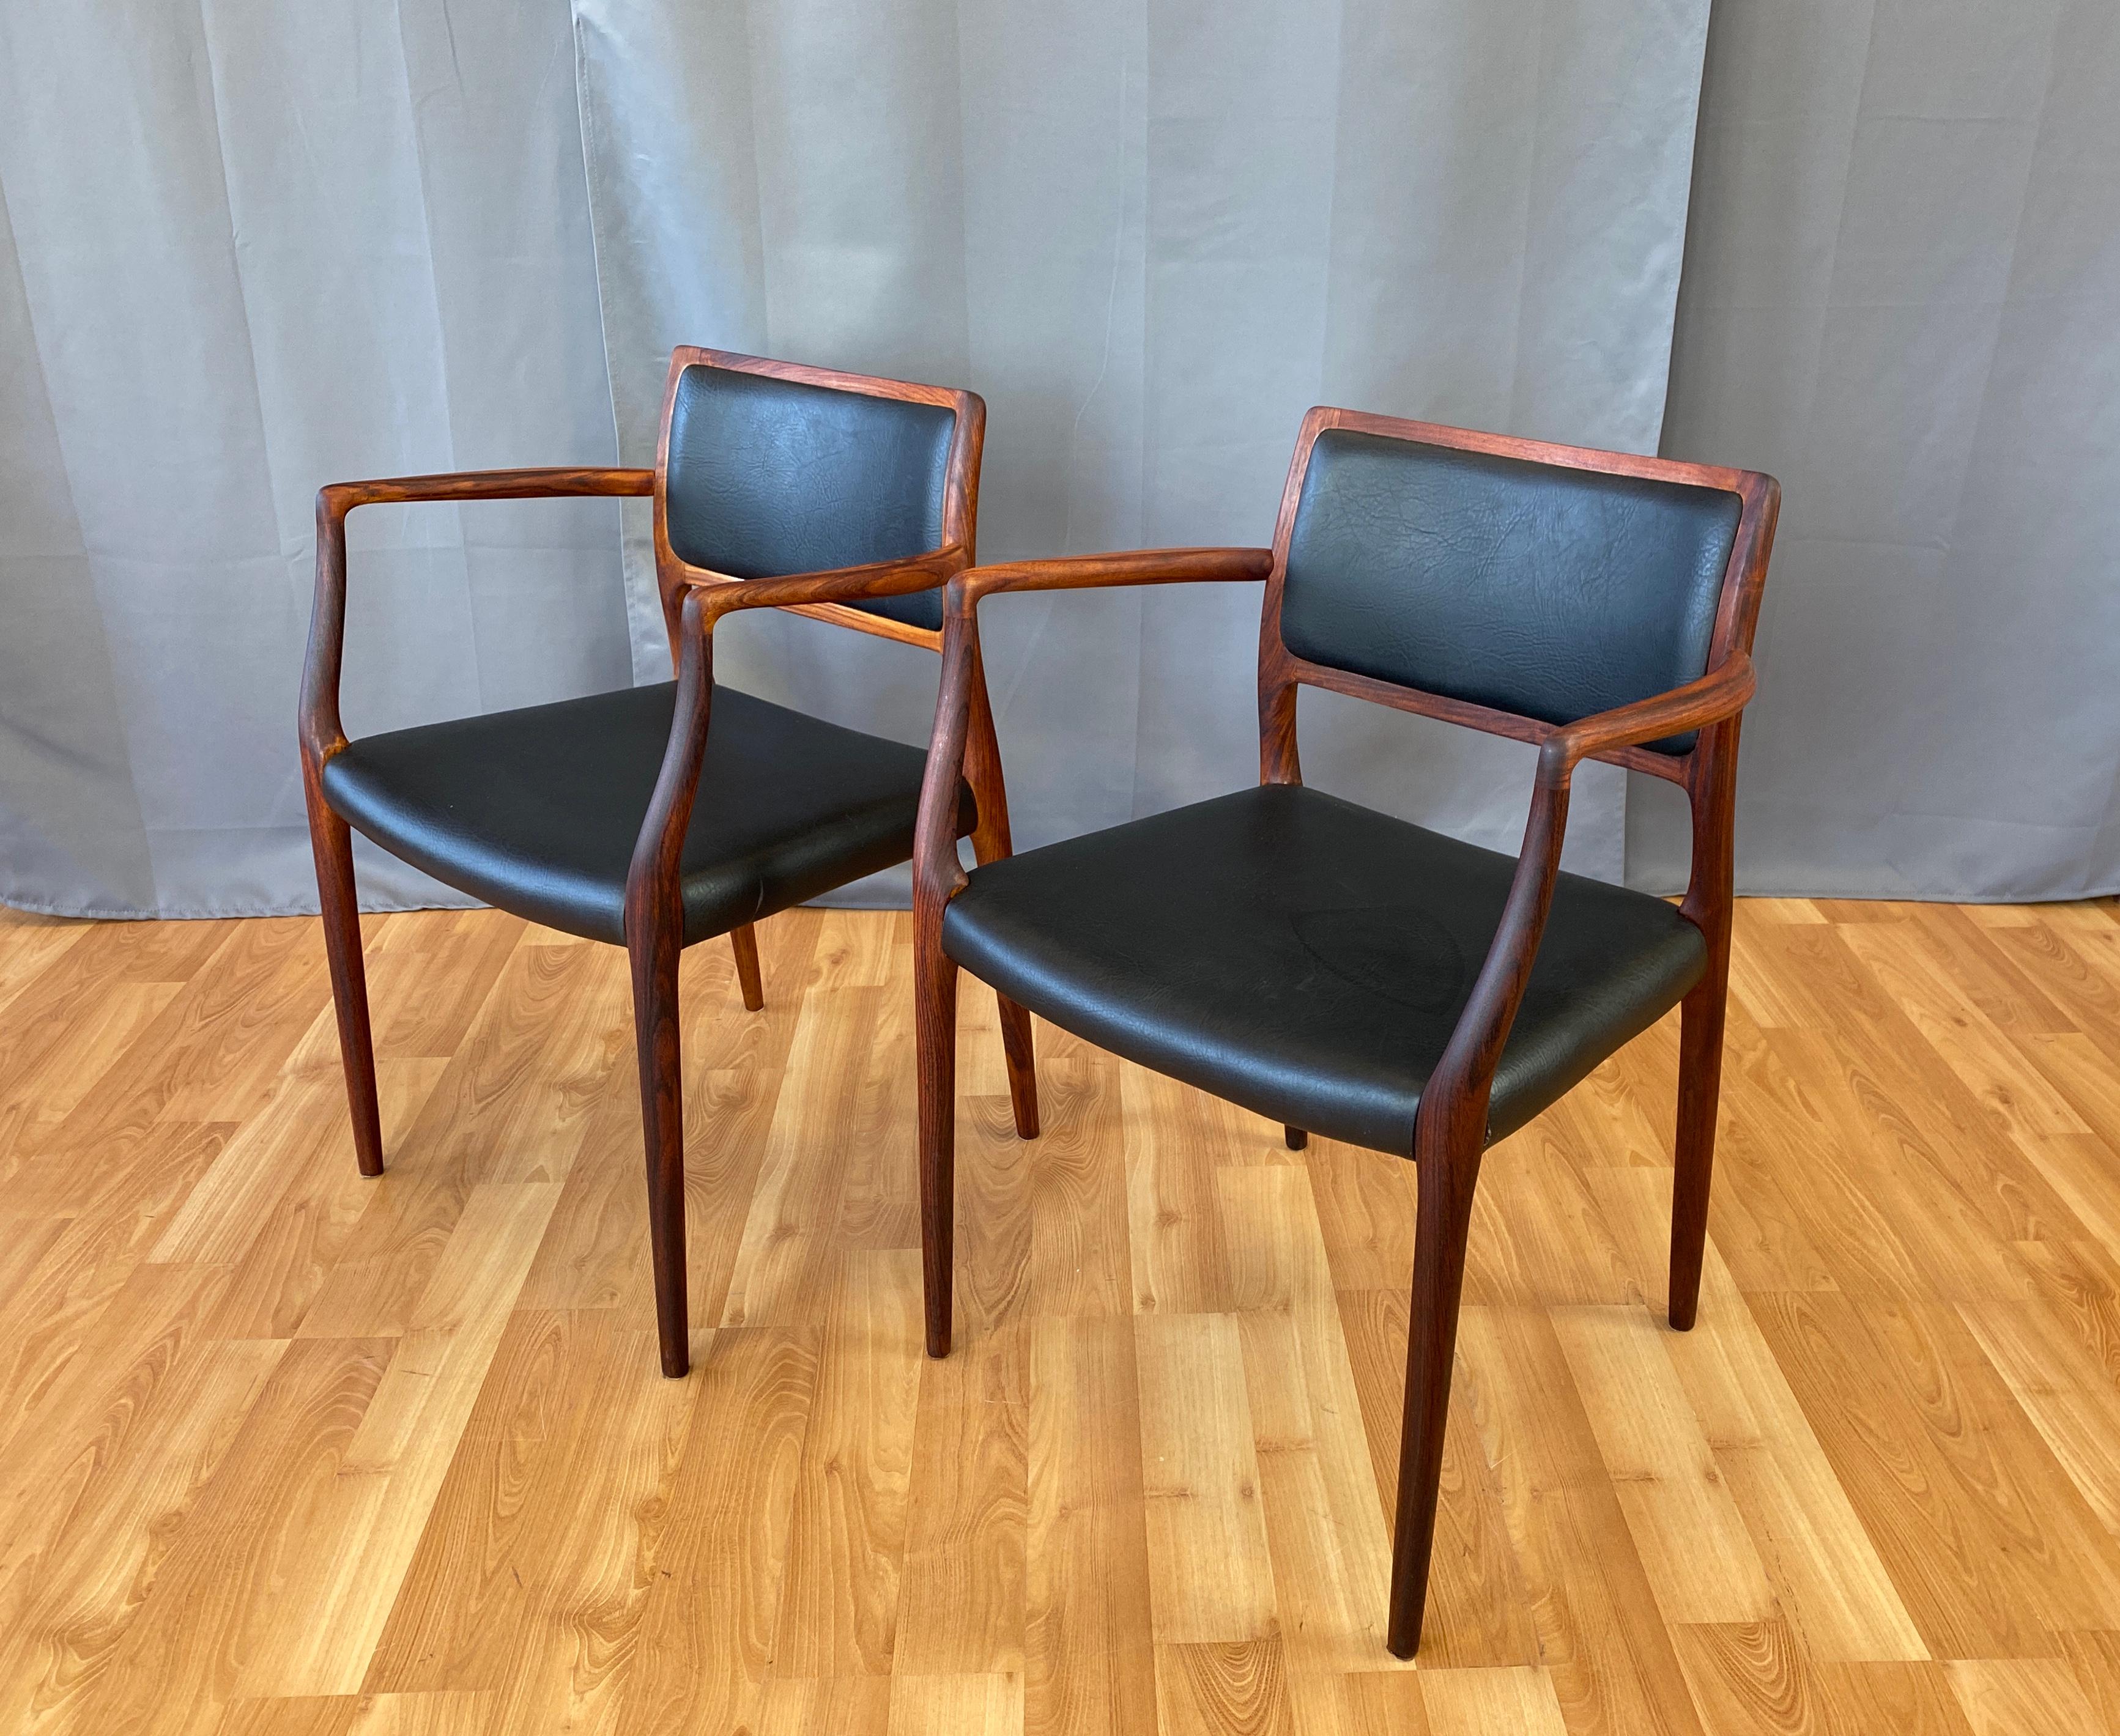 Offered are a pair of Niels Otto Møller model 65 armchairs, frames are rosewood, black upholstery is vinyl.